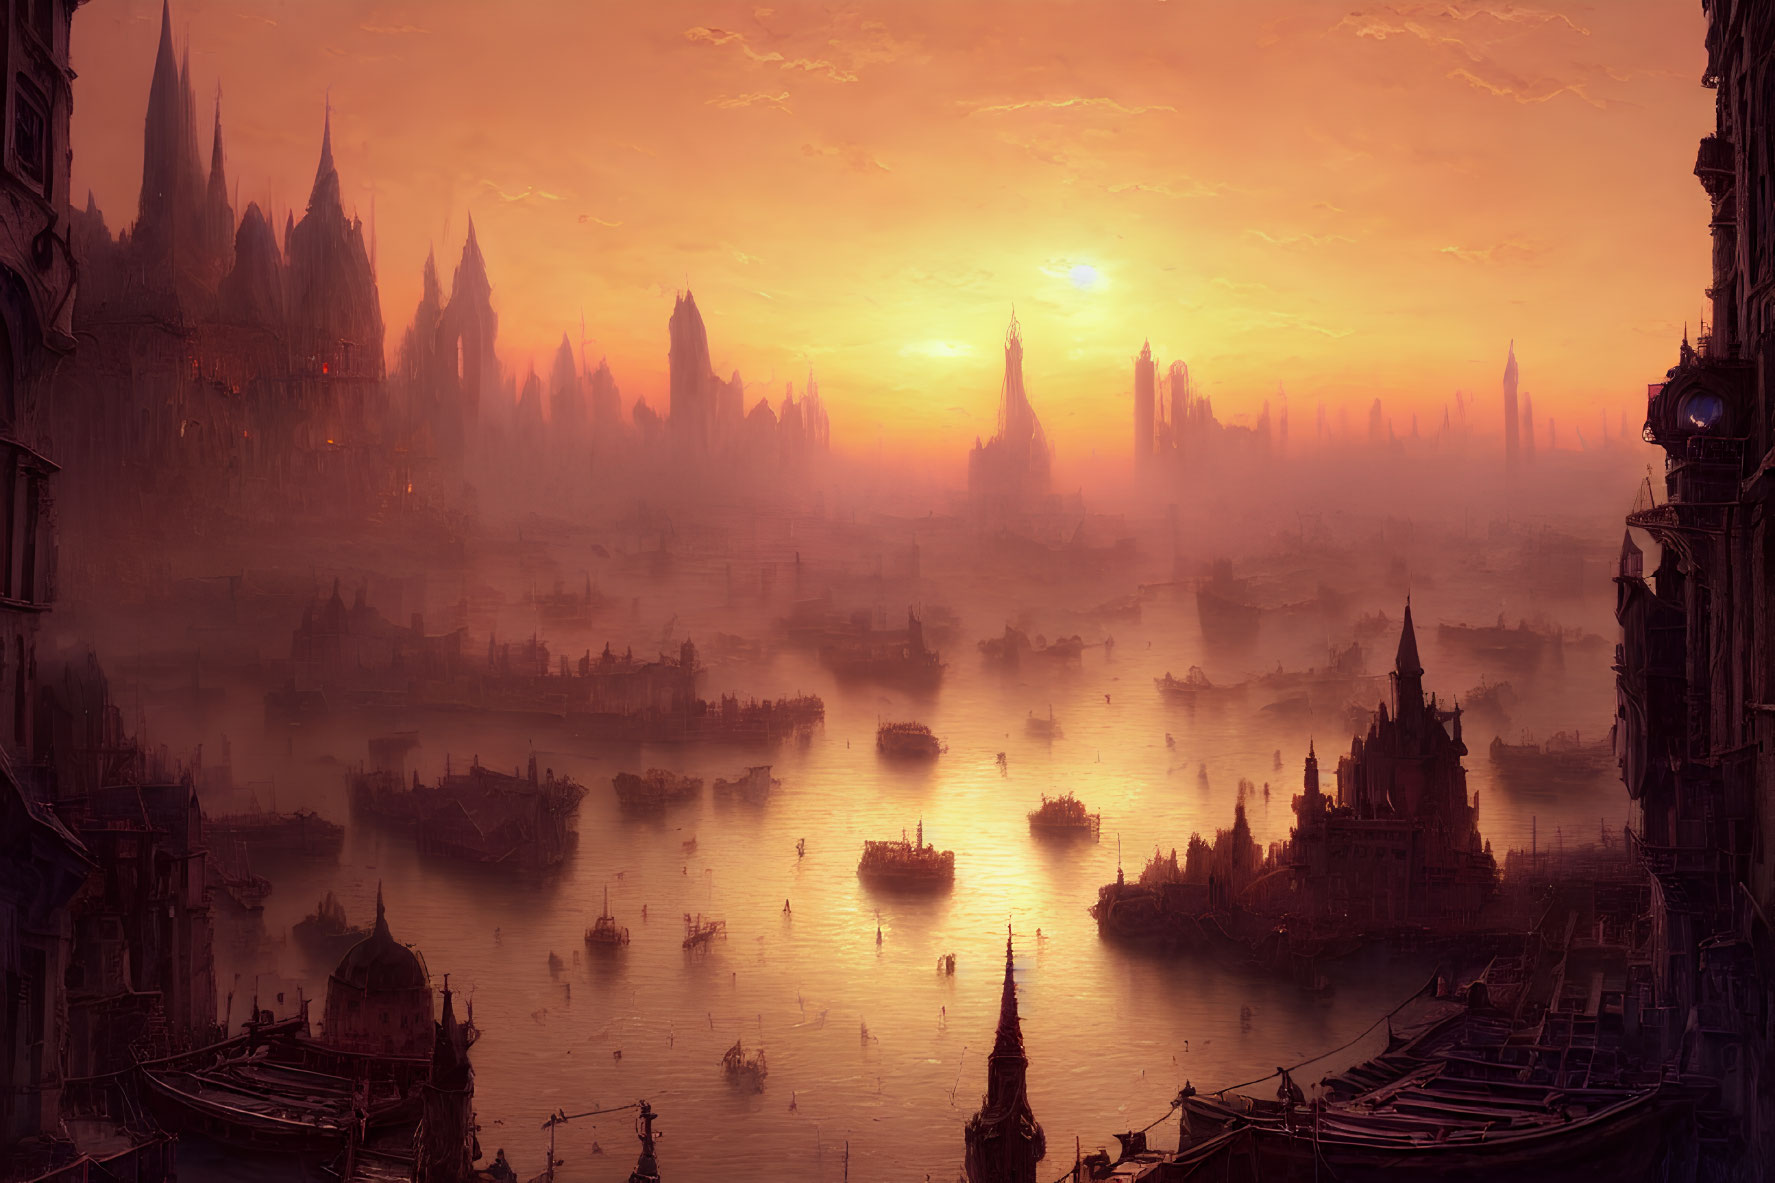 Gothic spires and boats in misty sunset cityscape